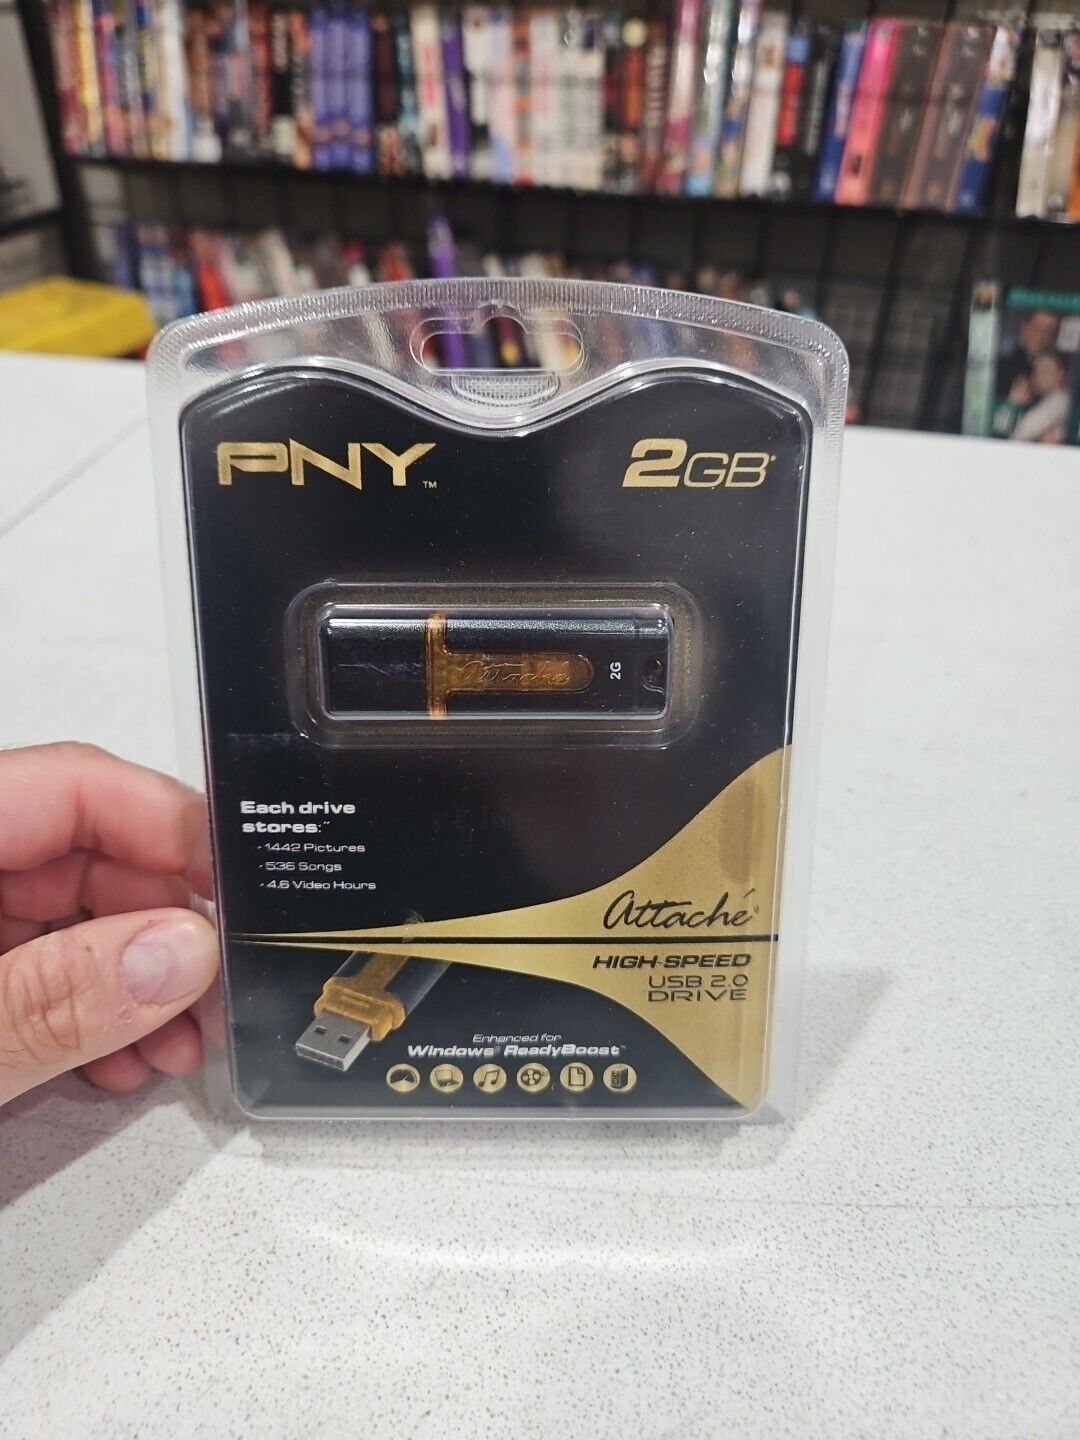 PNY 2GB Attache’ High Speed USB 2.0 Drive Enhanced For Windows Ready Boost New